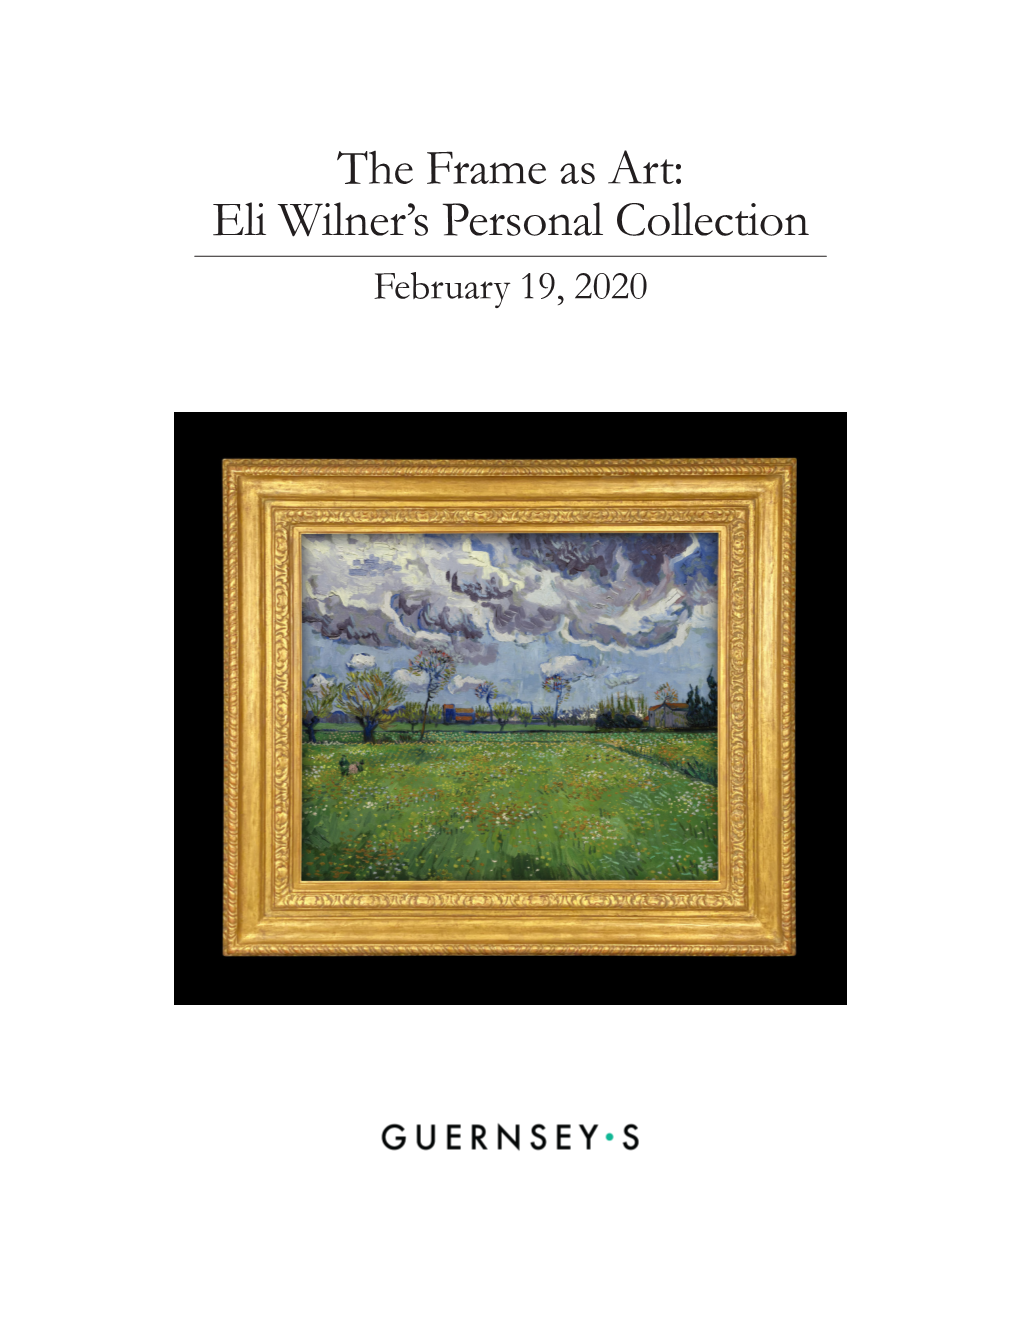 The Frame As Art: Eli Wilner's Personal Collection